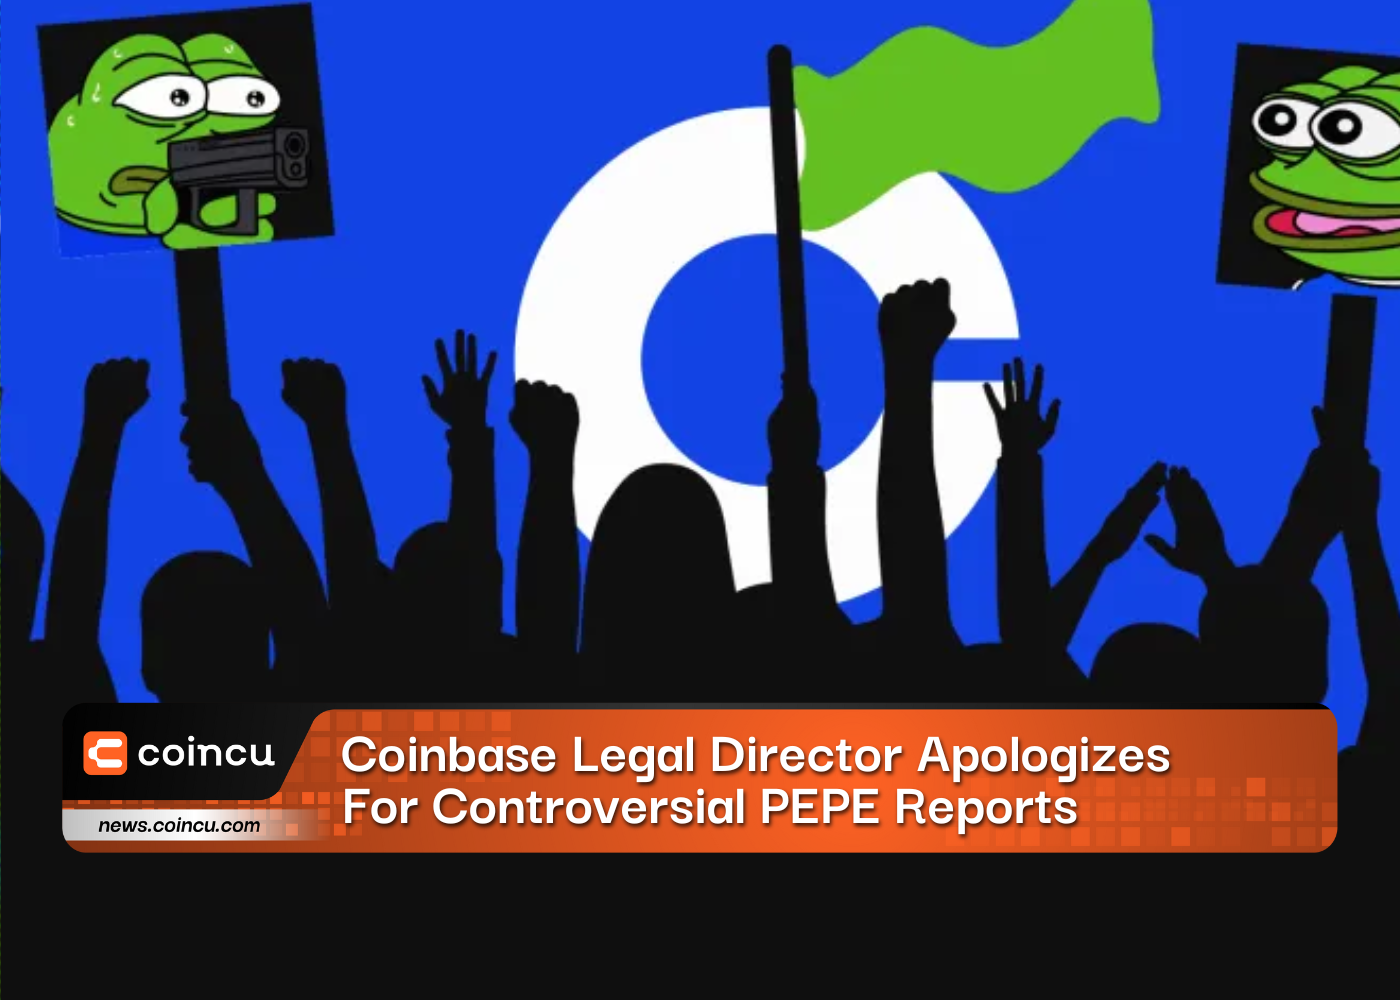 Coinbase Legal Director Apologizes For Controversial PEPE Reports